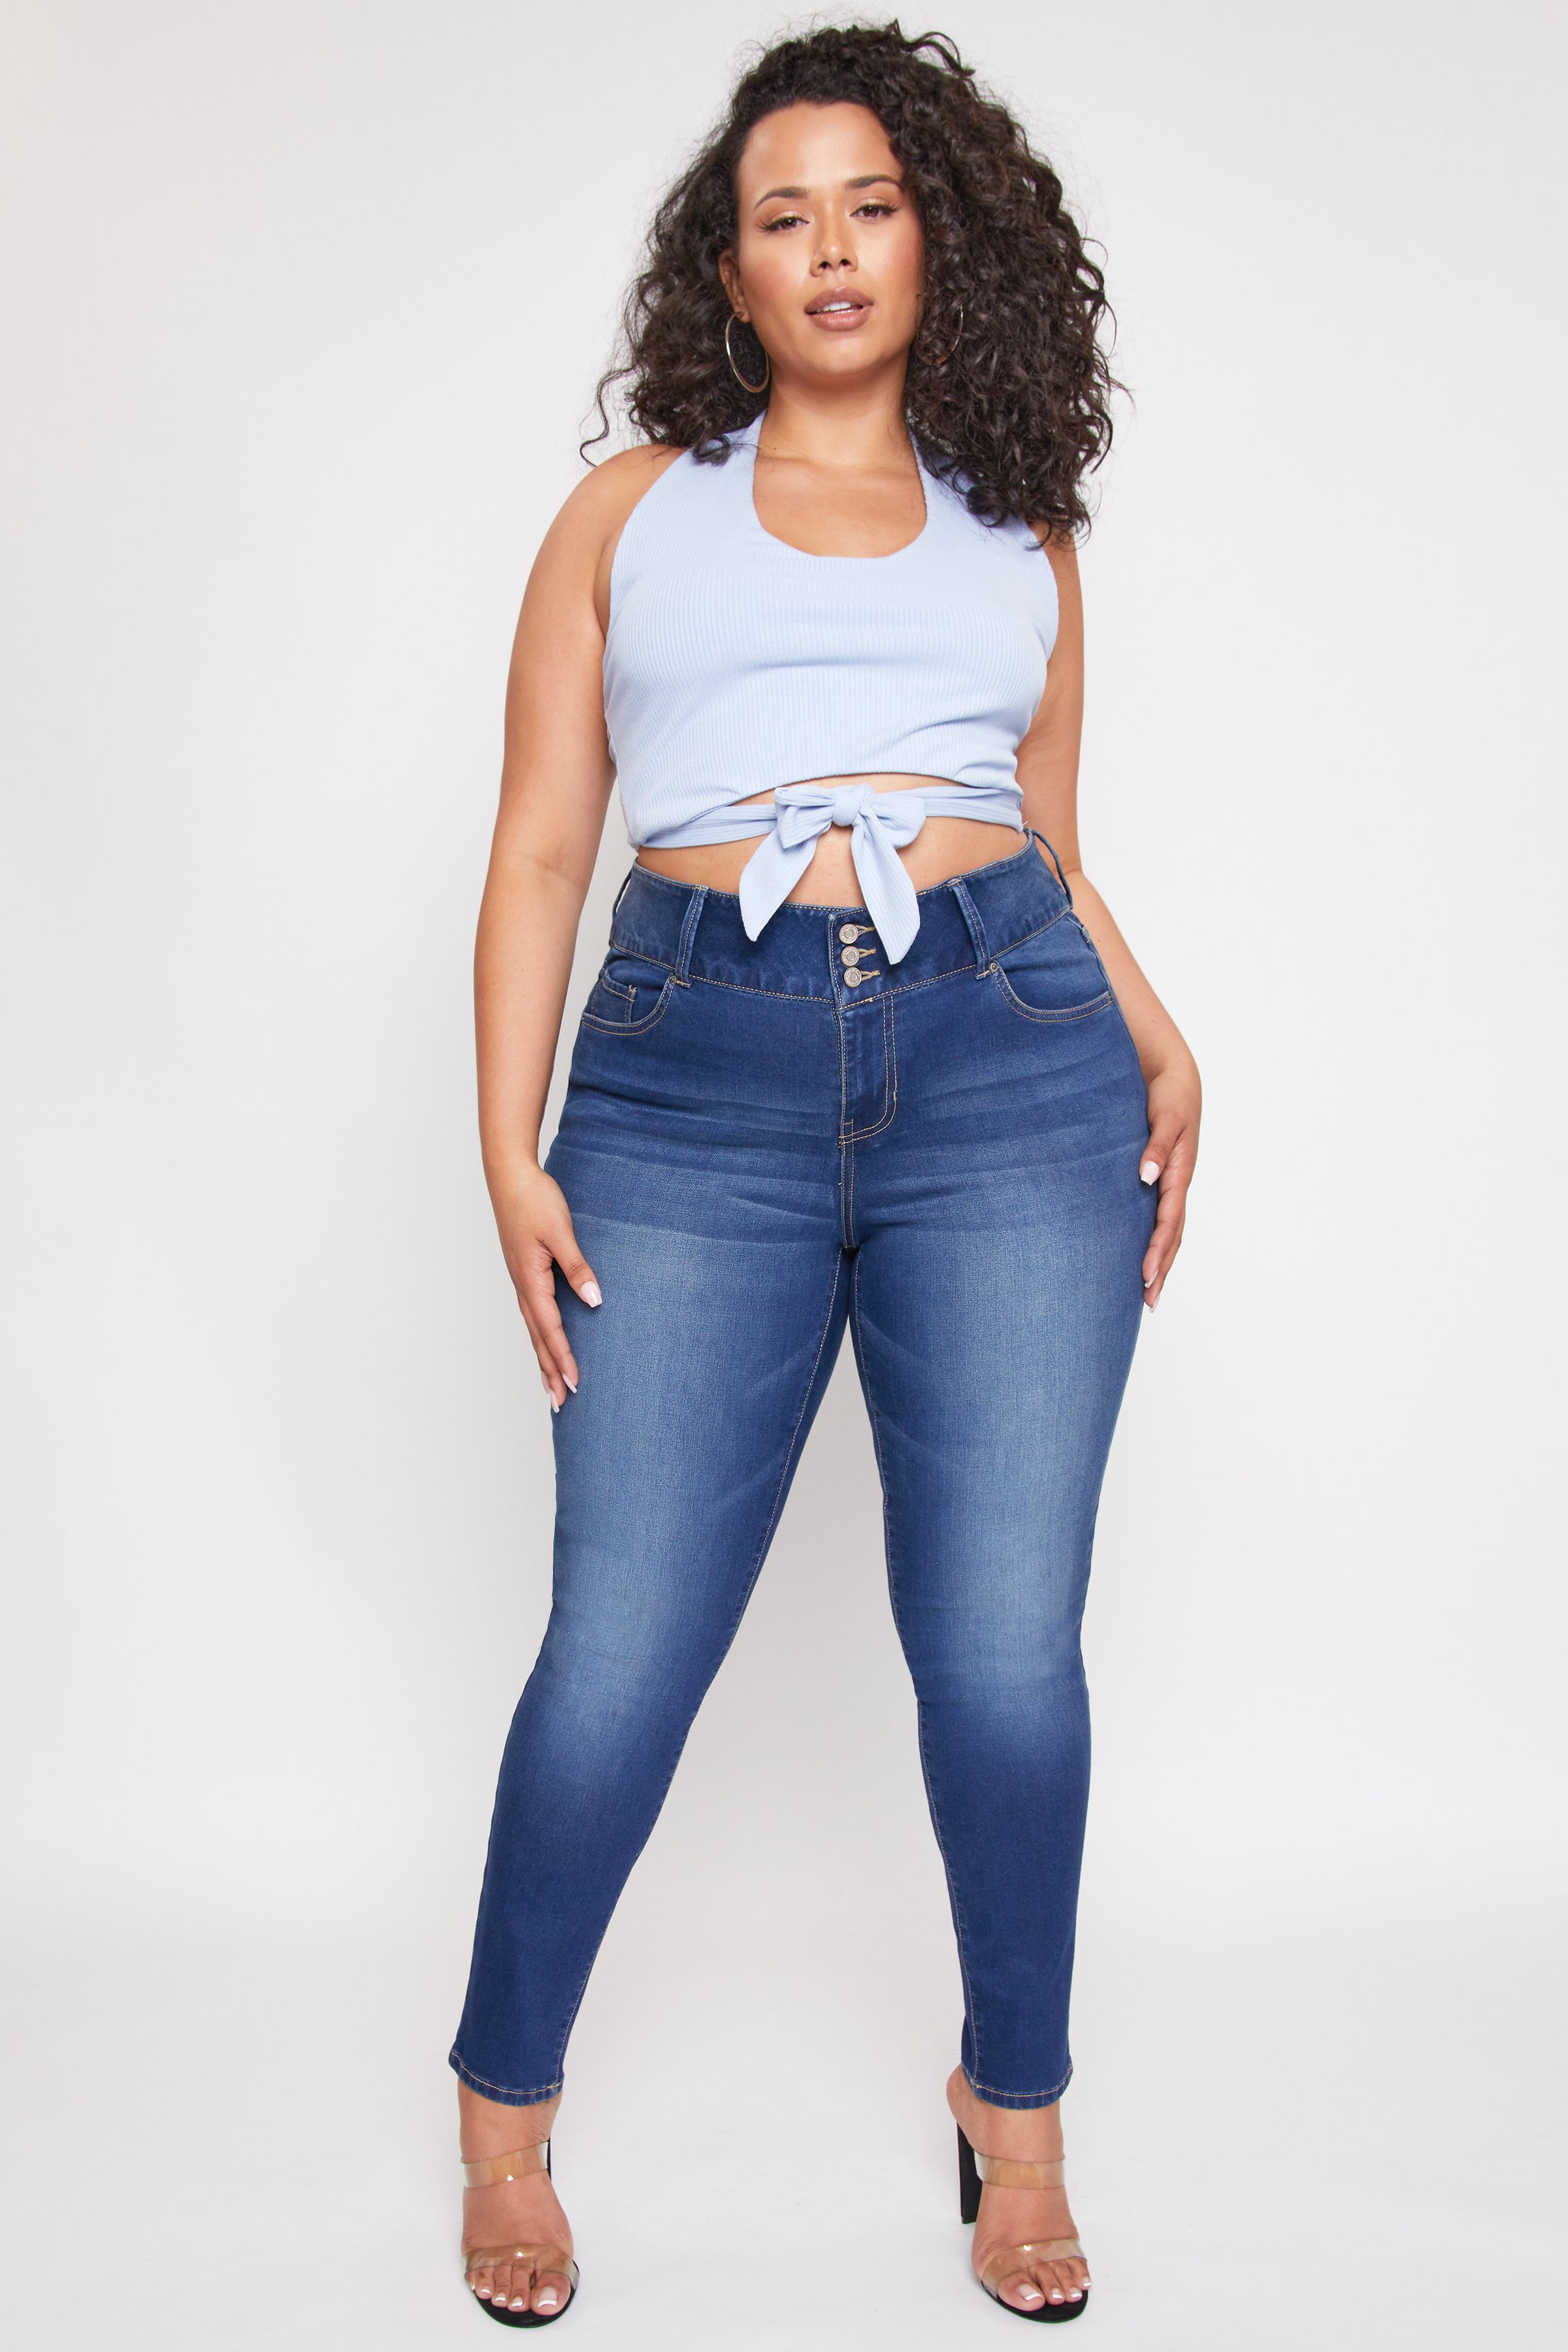 YMI Women's Plus Size High-Waisted 3-Button Closure Skinny Jeans 